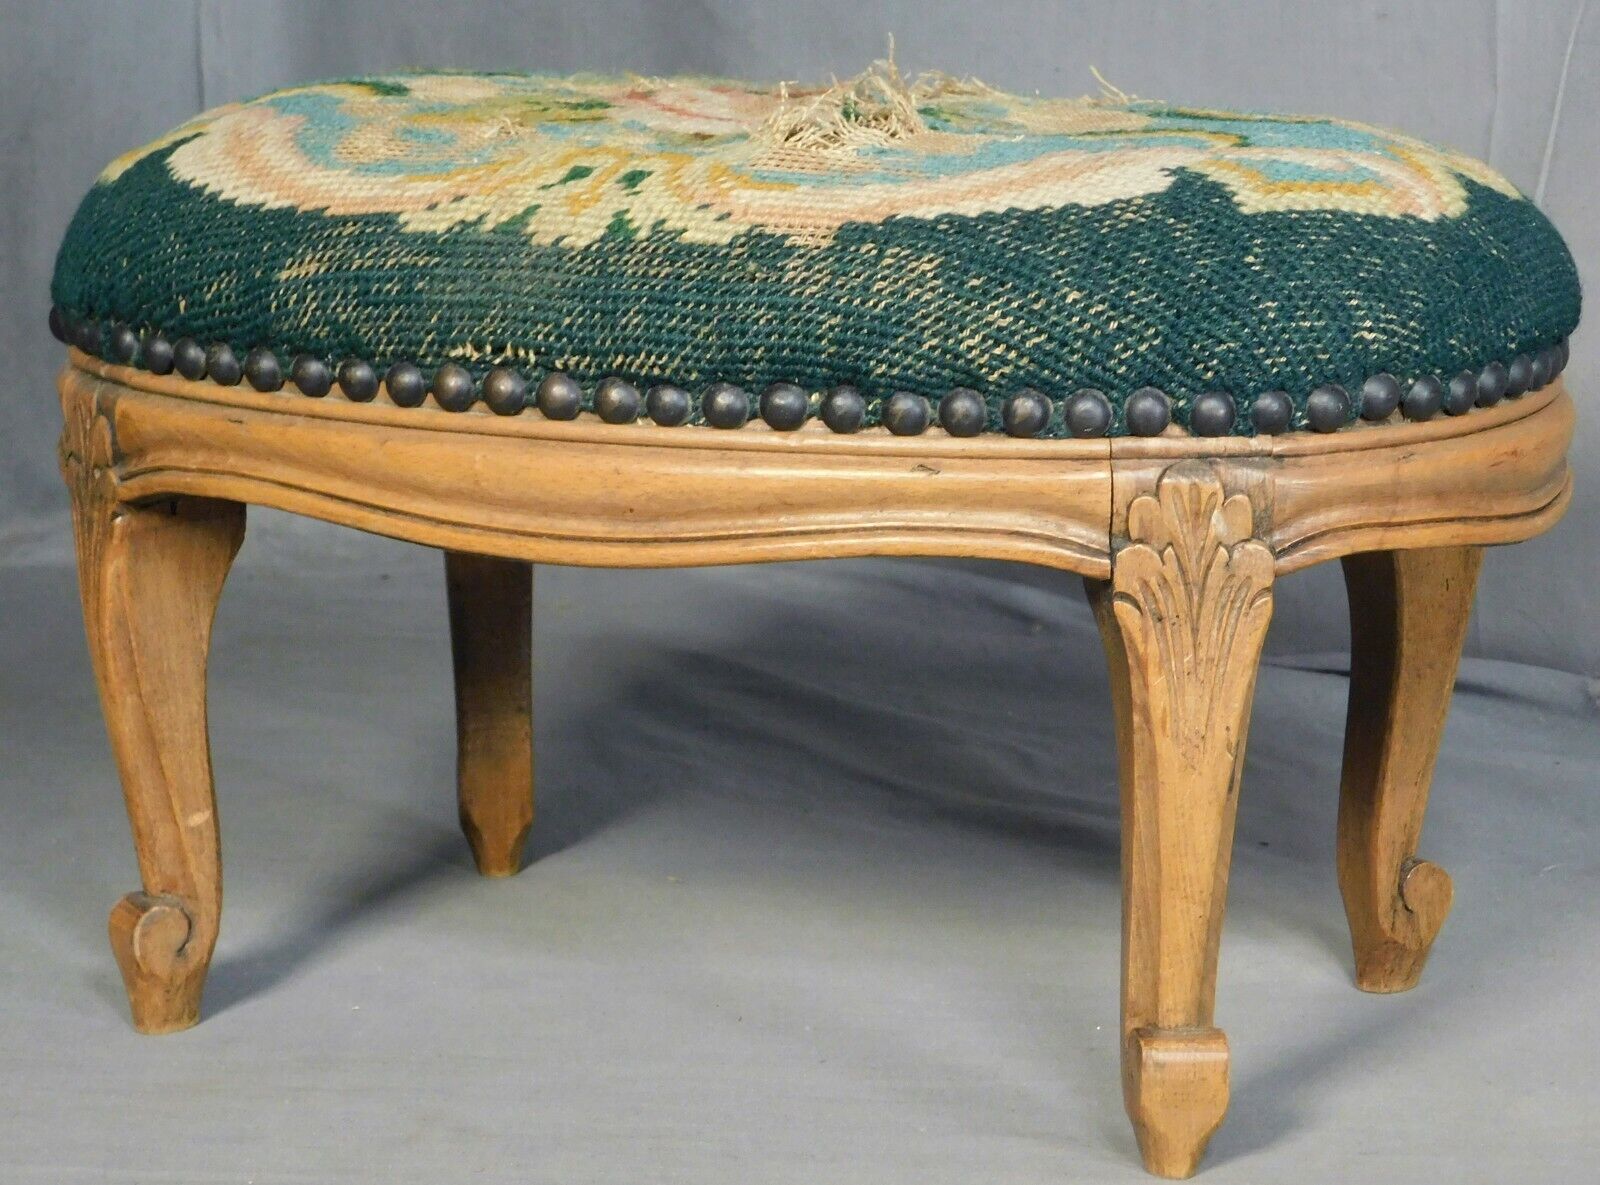 Antique Carved Beech Wood Louis XV Oval Foot Stool Early 1900s Belgium French